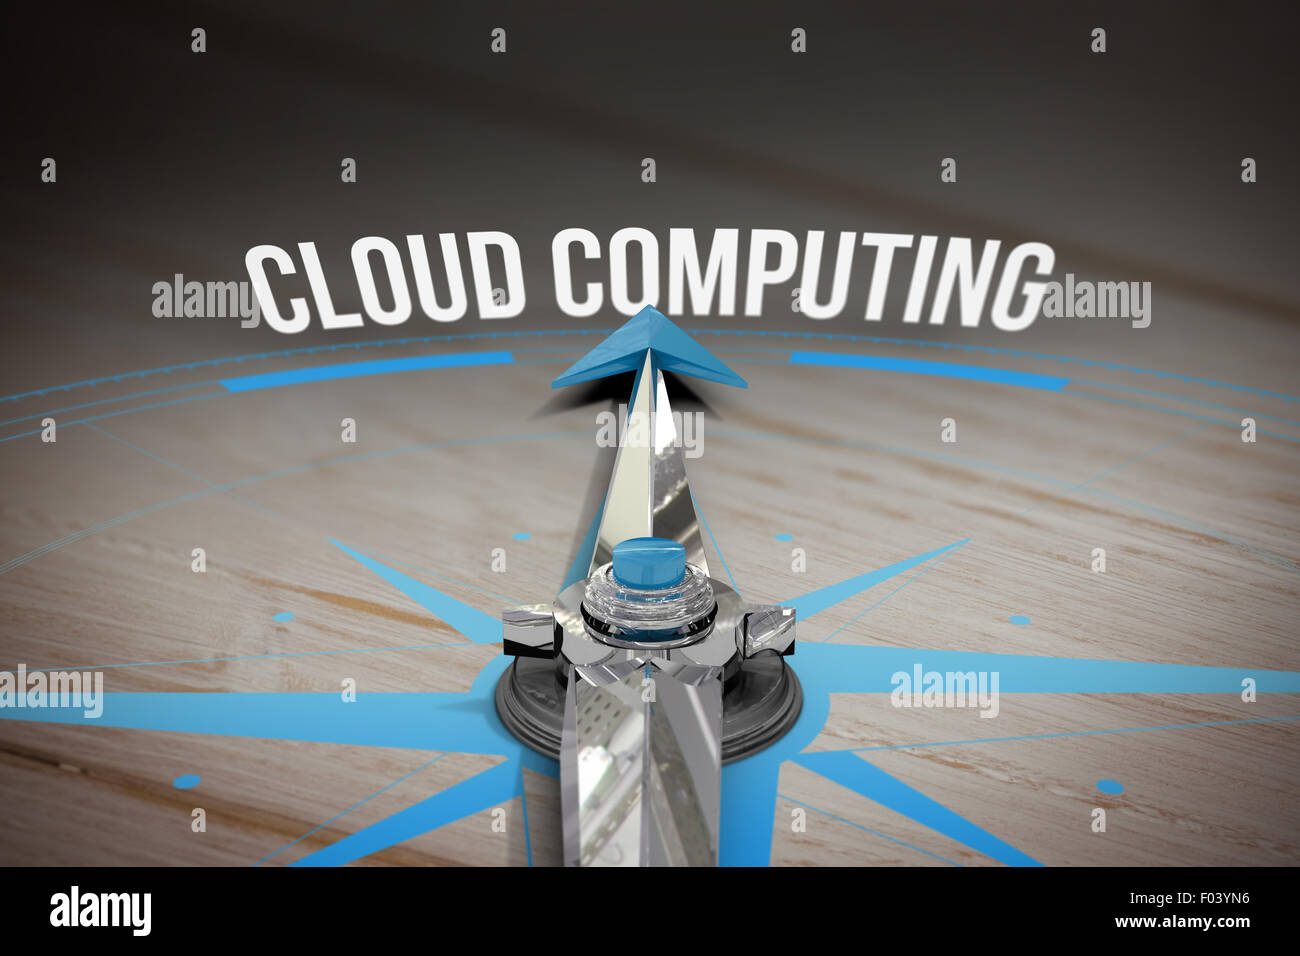 Cloud computing against brown wooden background Stock Photo